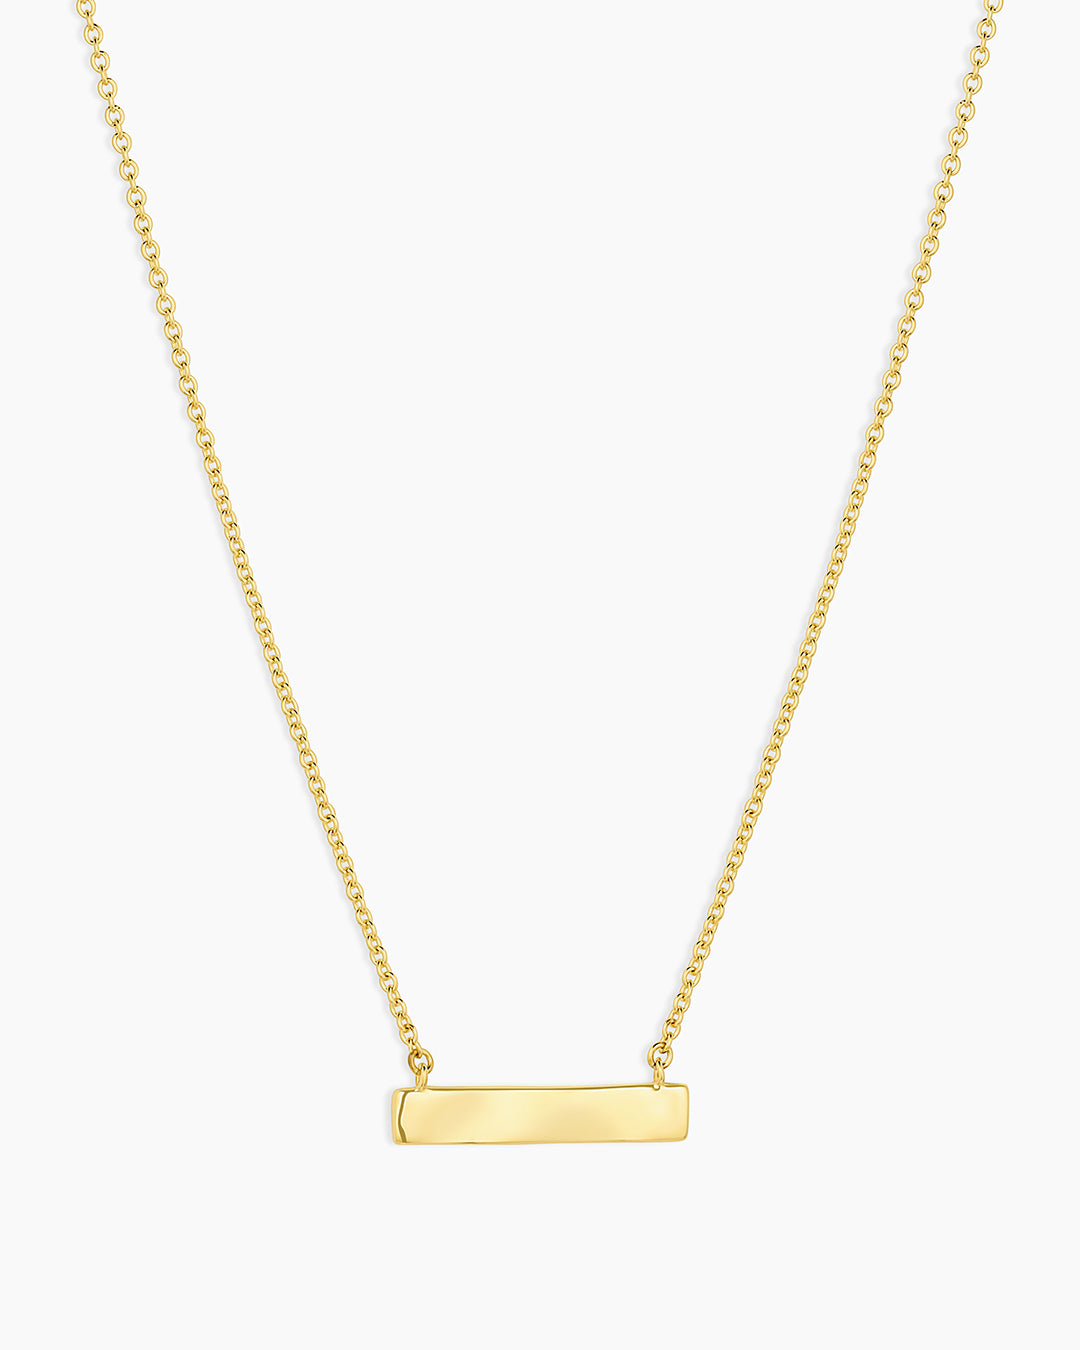 Personalized, Engraved Necklace and Jewelry Styles | gorjana